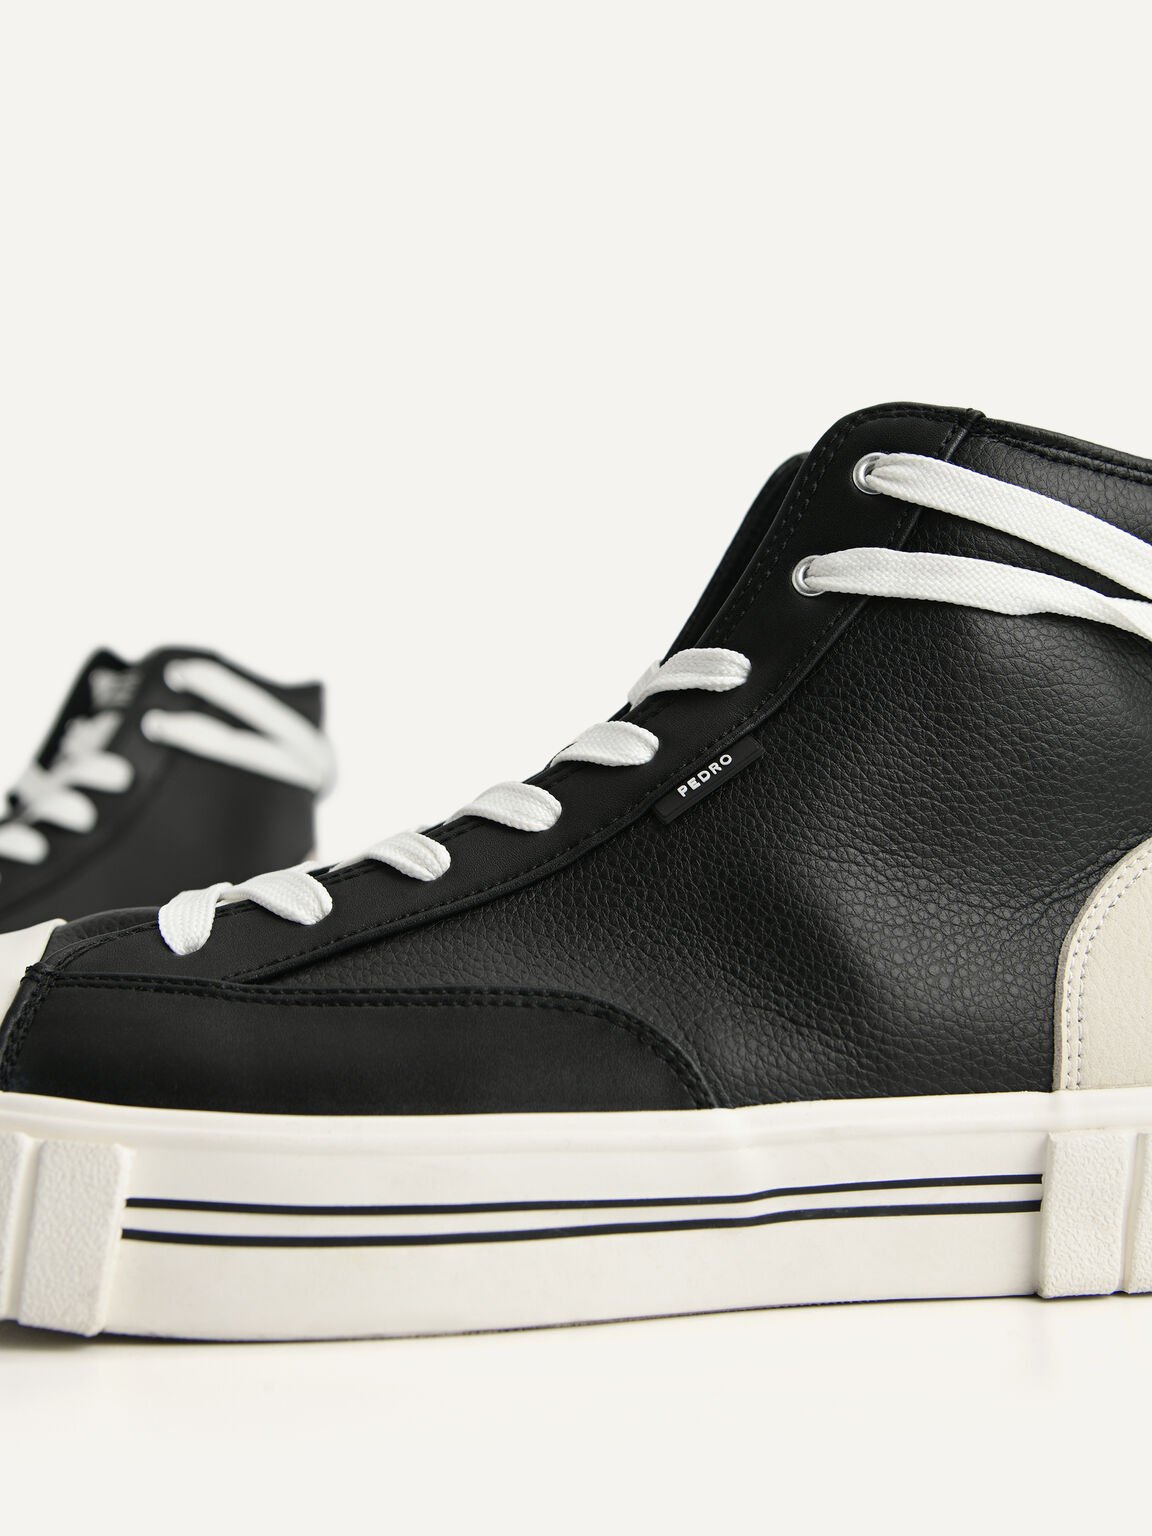 Beat Lace-Up Sneakers, Black